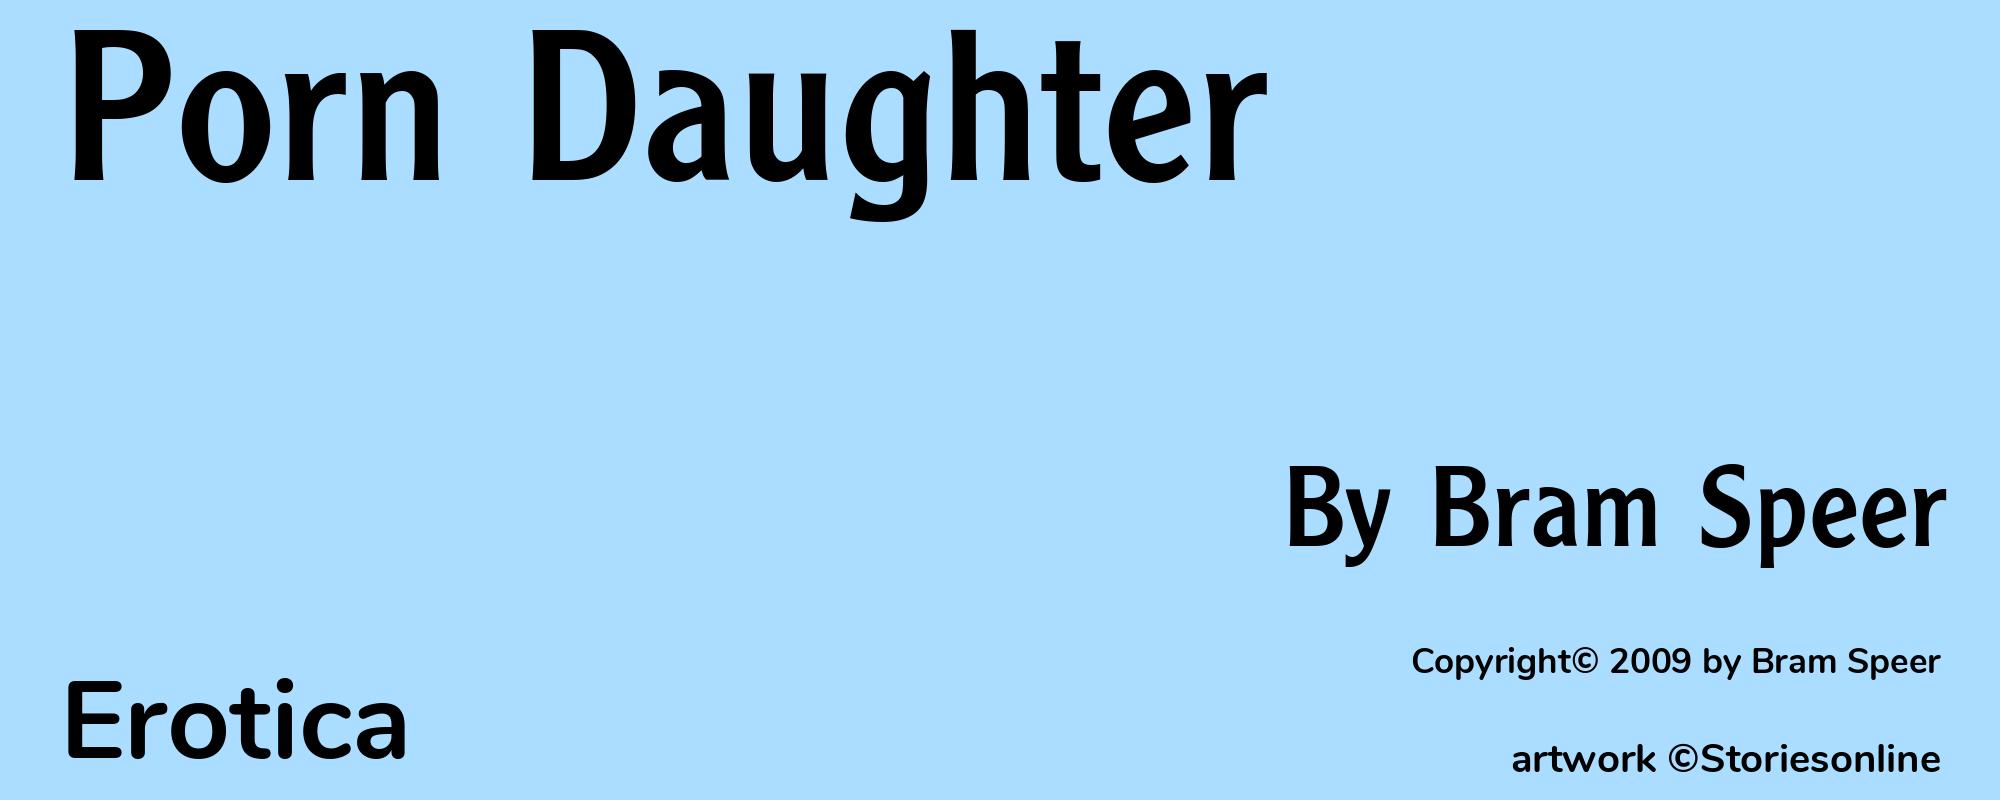 Porn Daughter - Cover